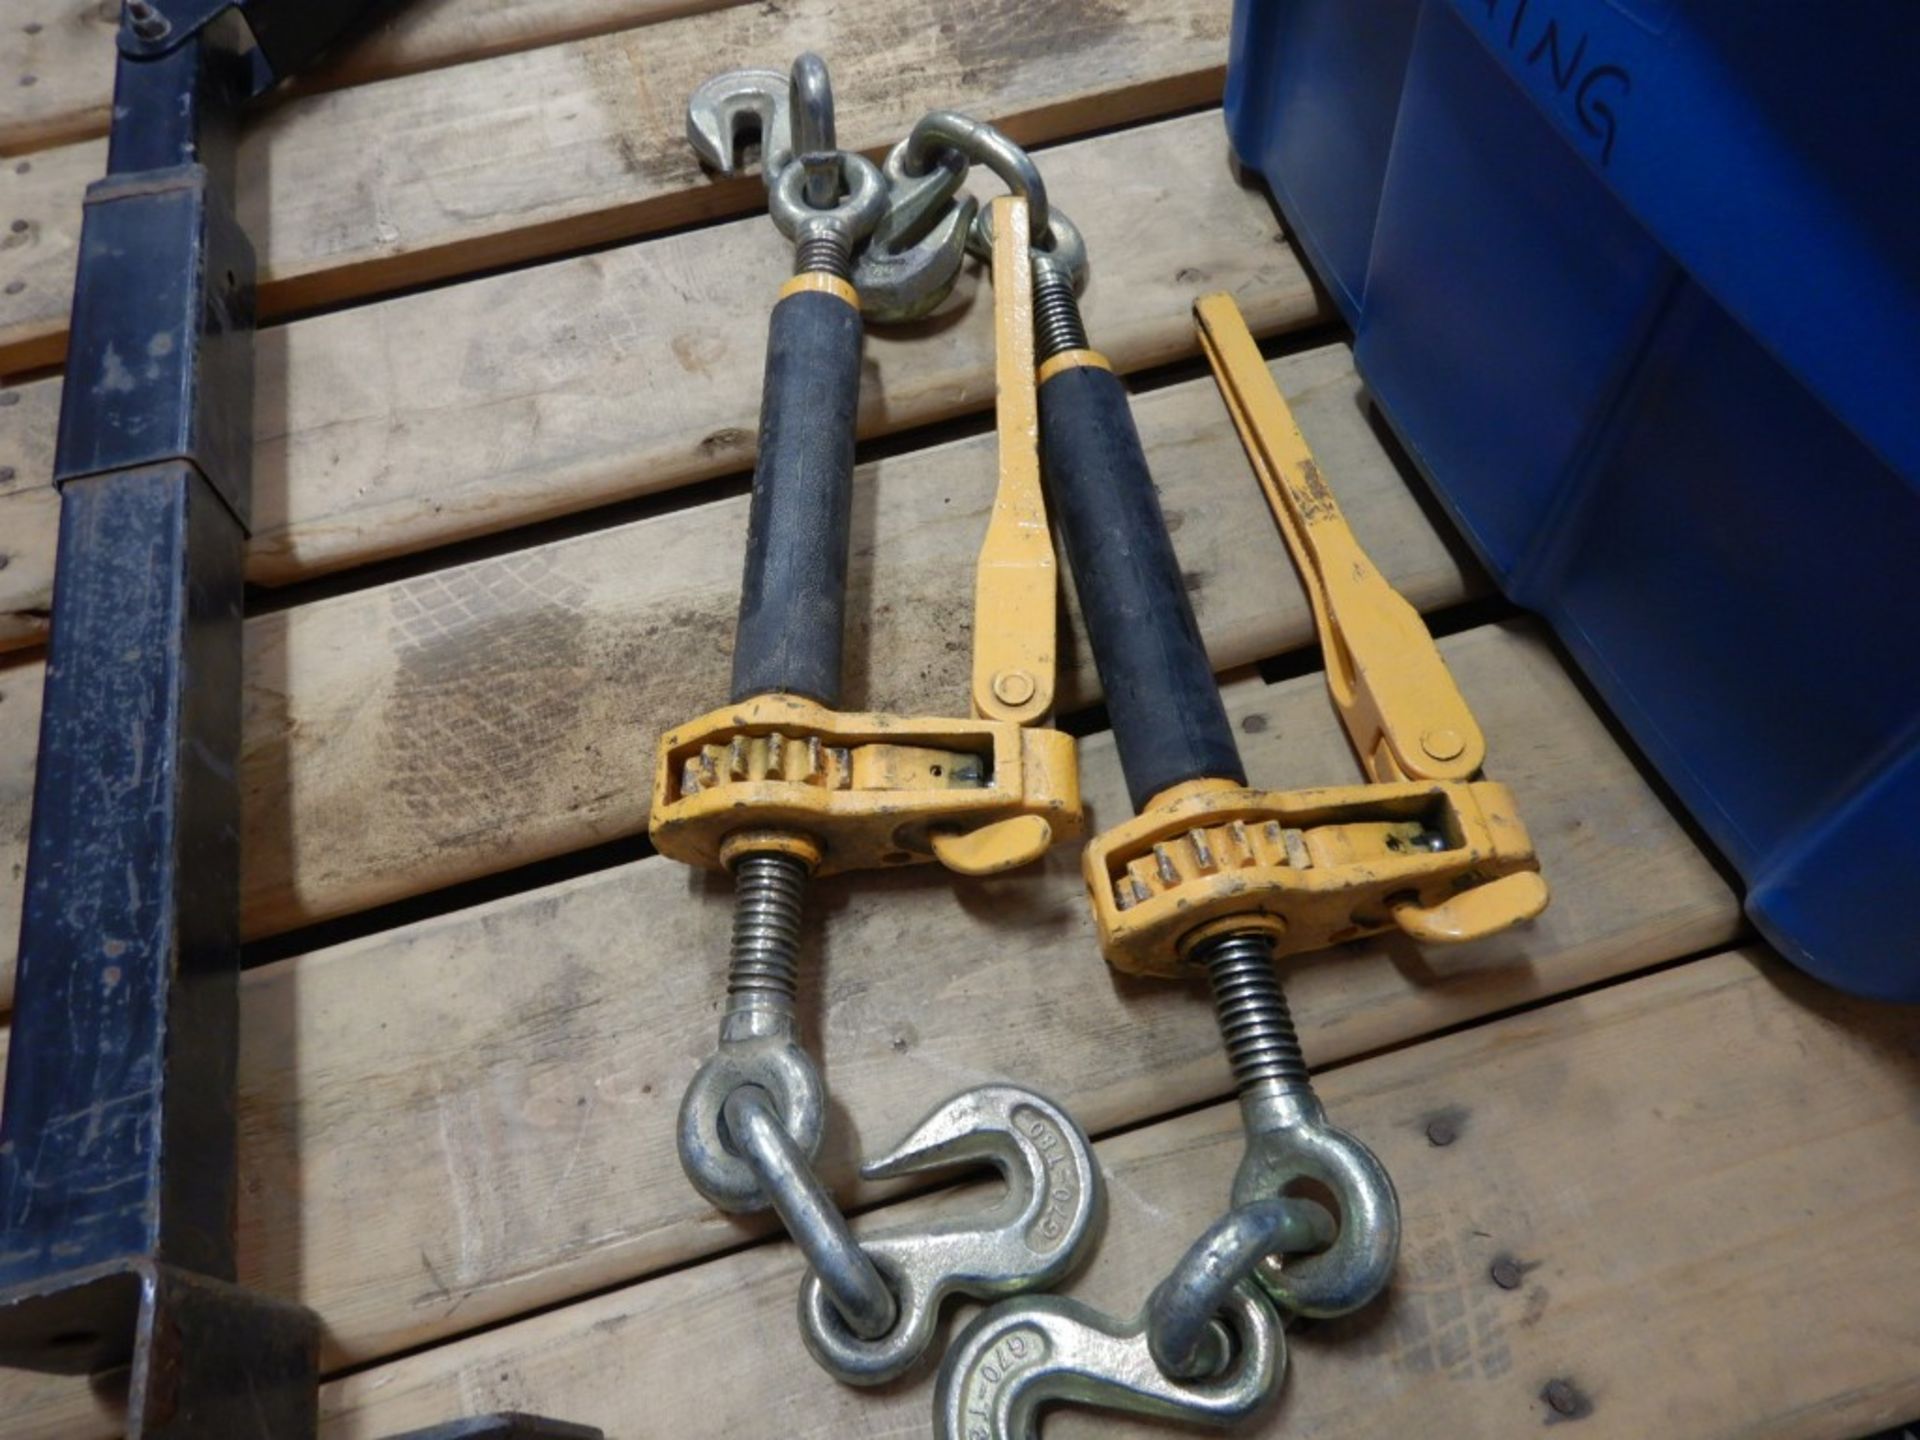 L/O RIGGING, C/W 2-RATCHET TYPE LOAD BOOMERS, 3-LOAD SLINGS, ASSORTED SHACKLES, ETC - Image 3 of 3